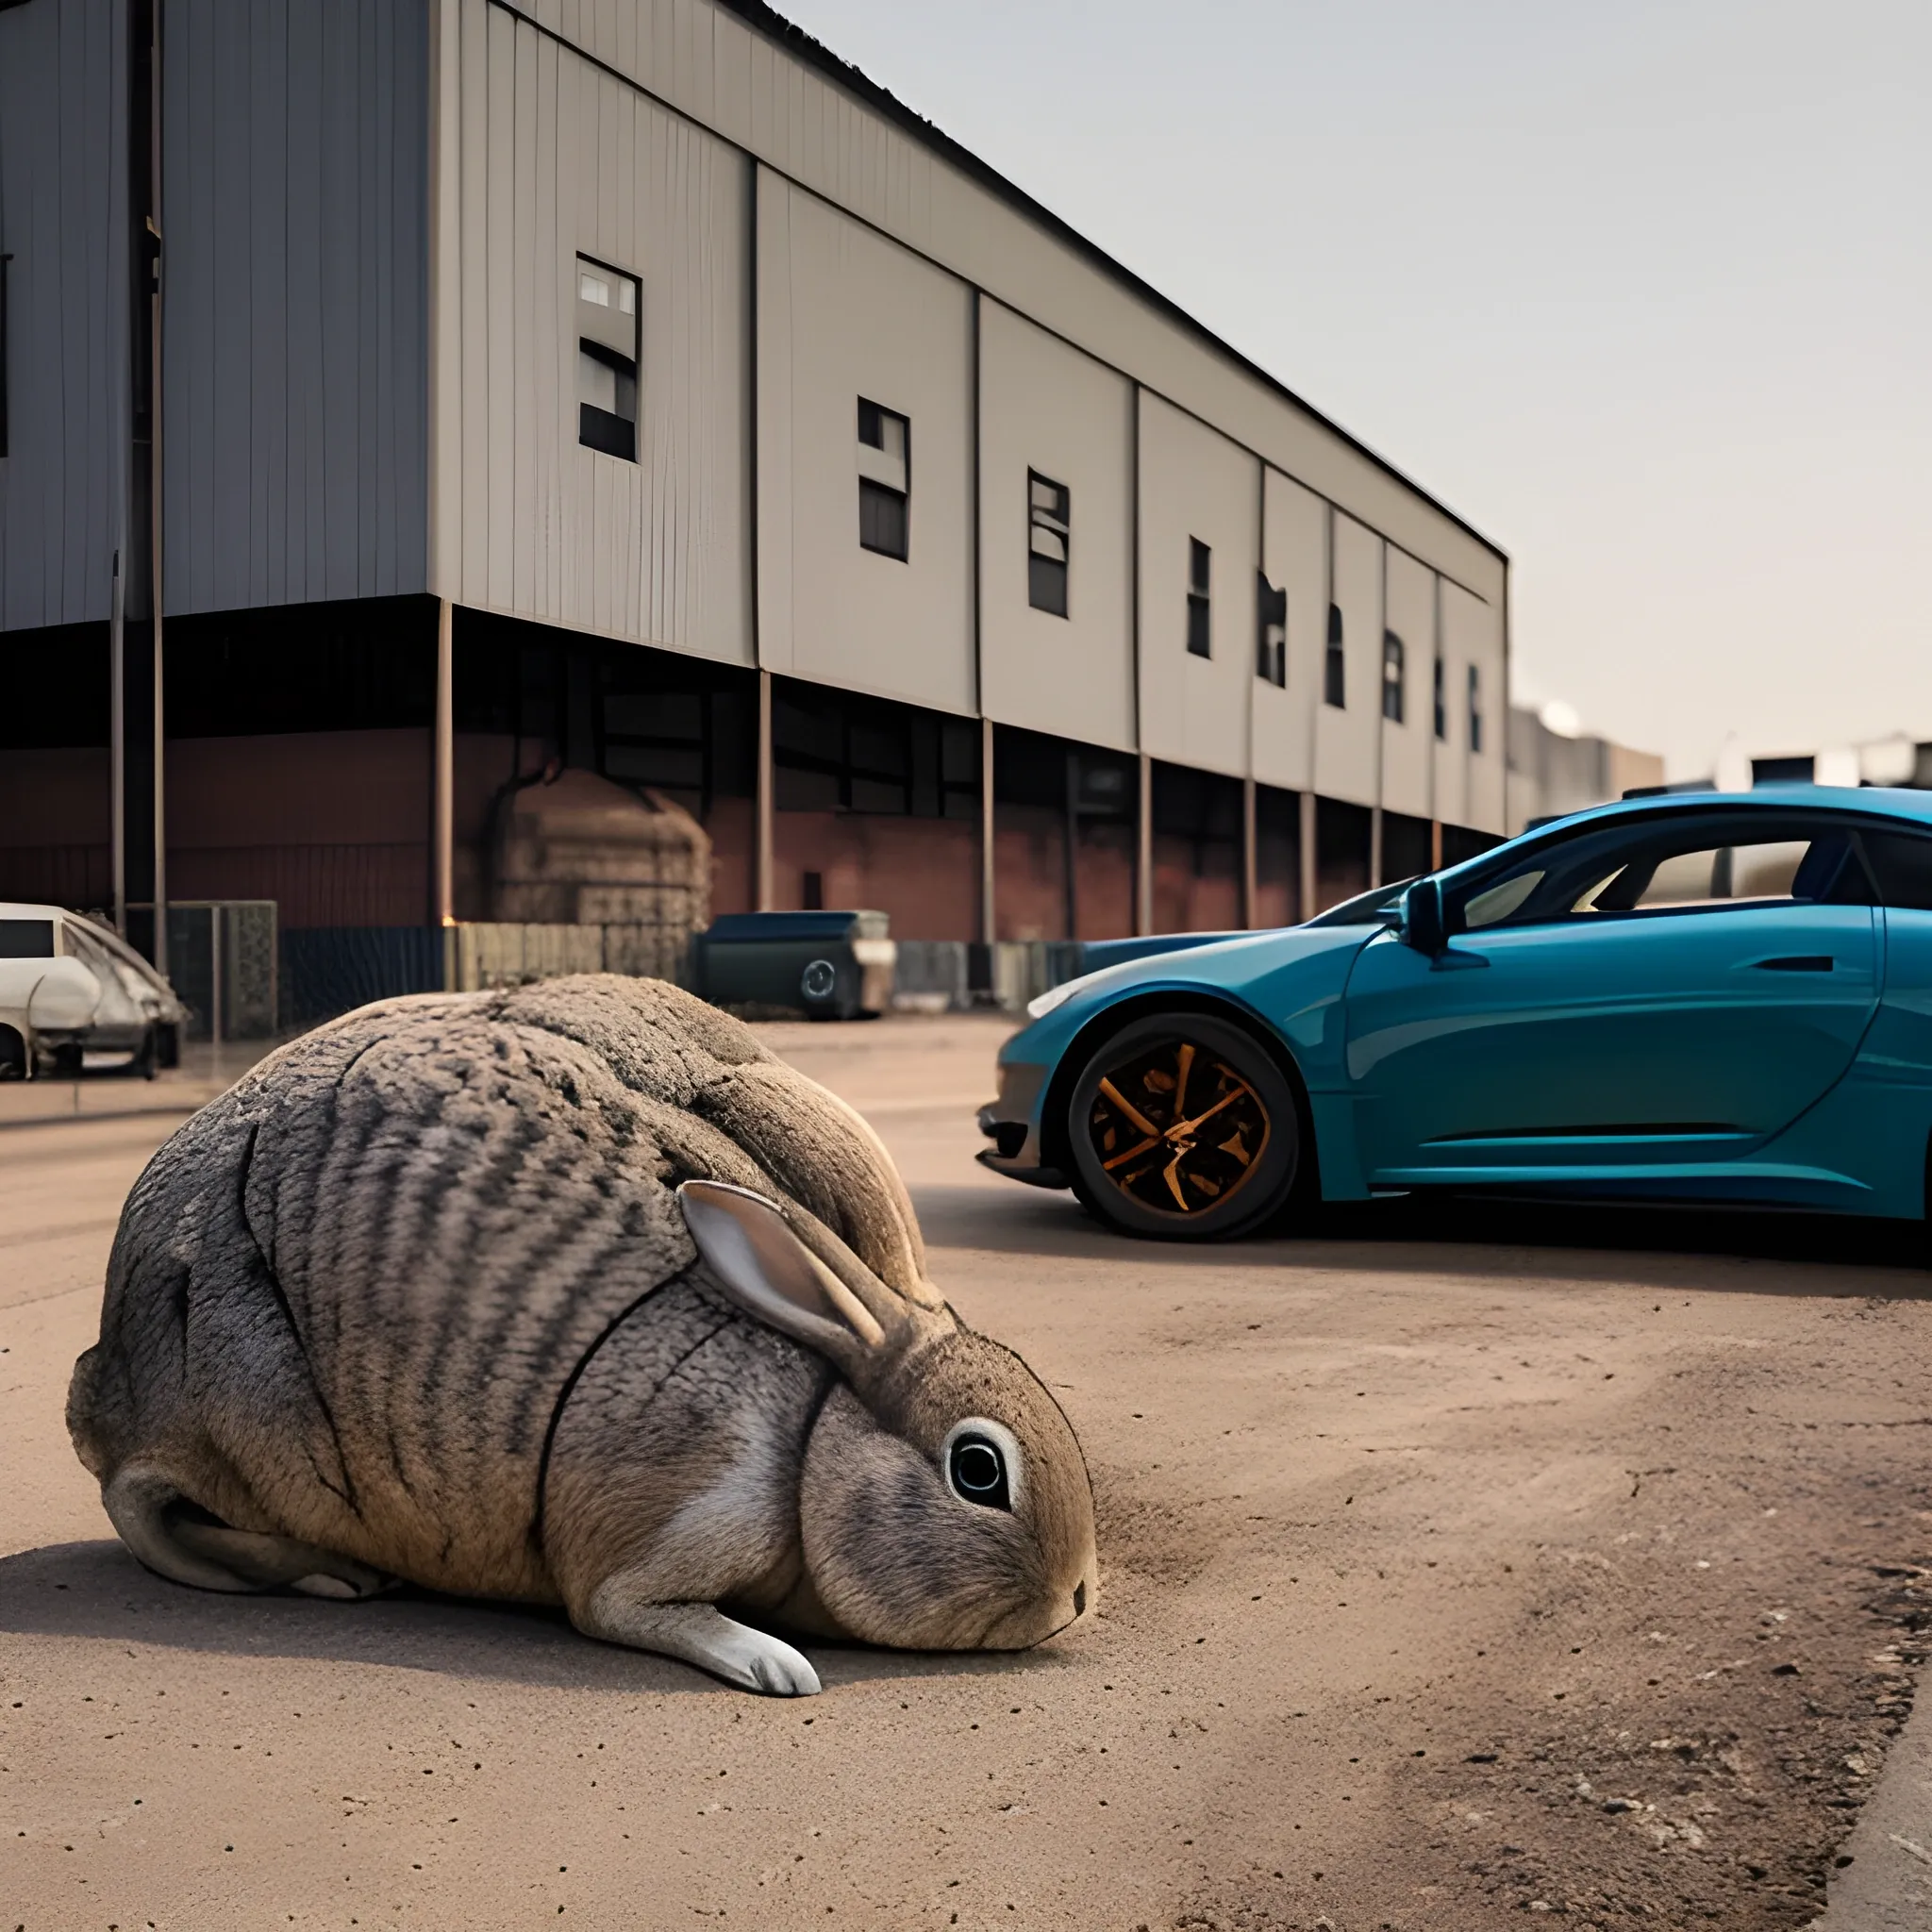 large crushed rabbit in the foreground with factory in the background and blurred fast car, photography